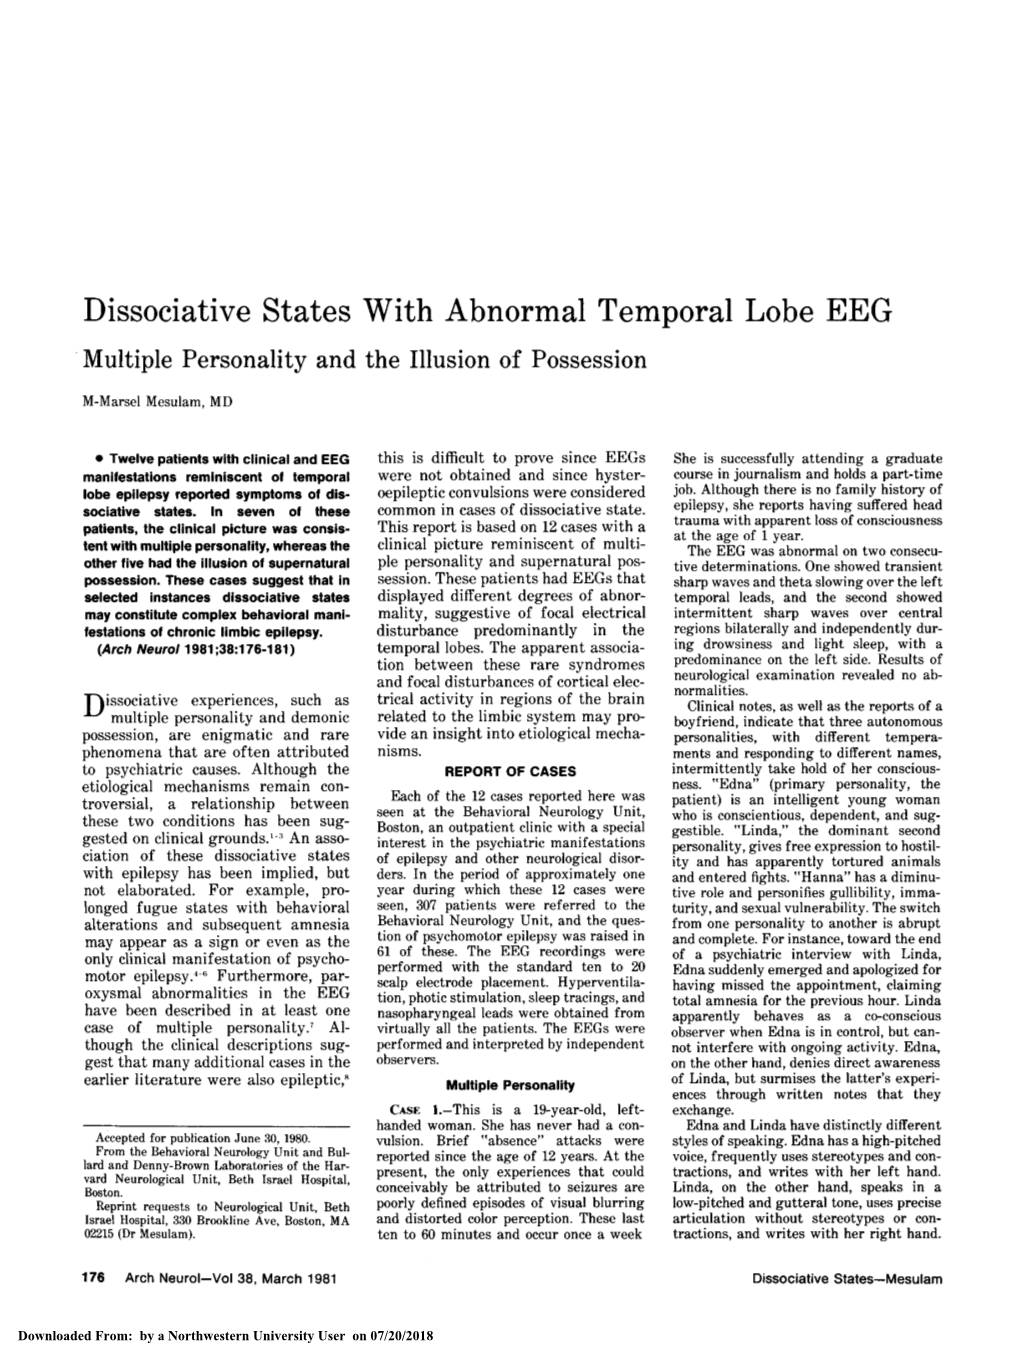 Dissociative States with Abnormal Temporal Lobe Eegmultiple